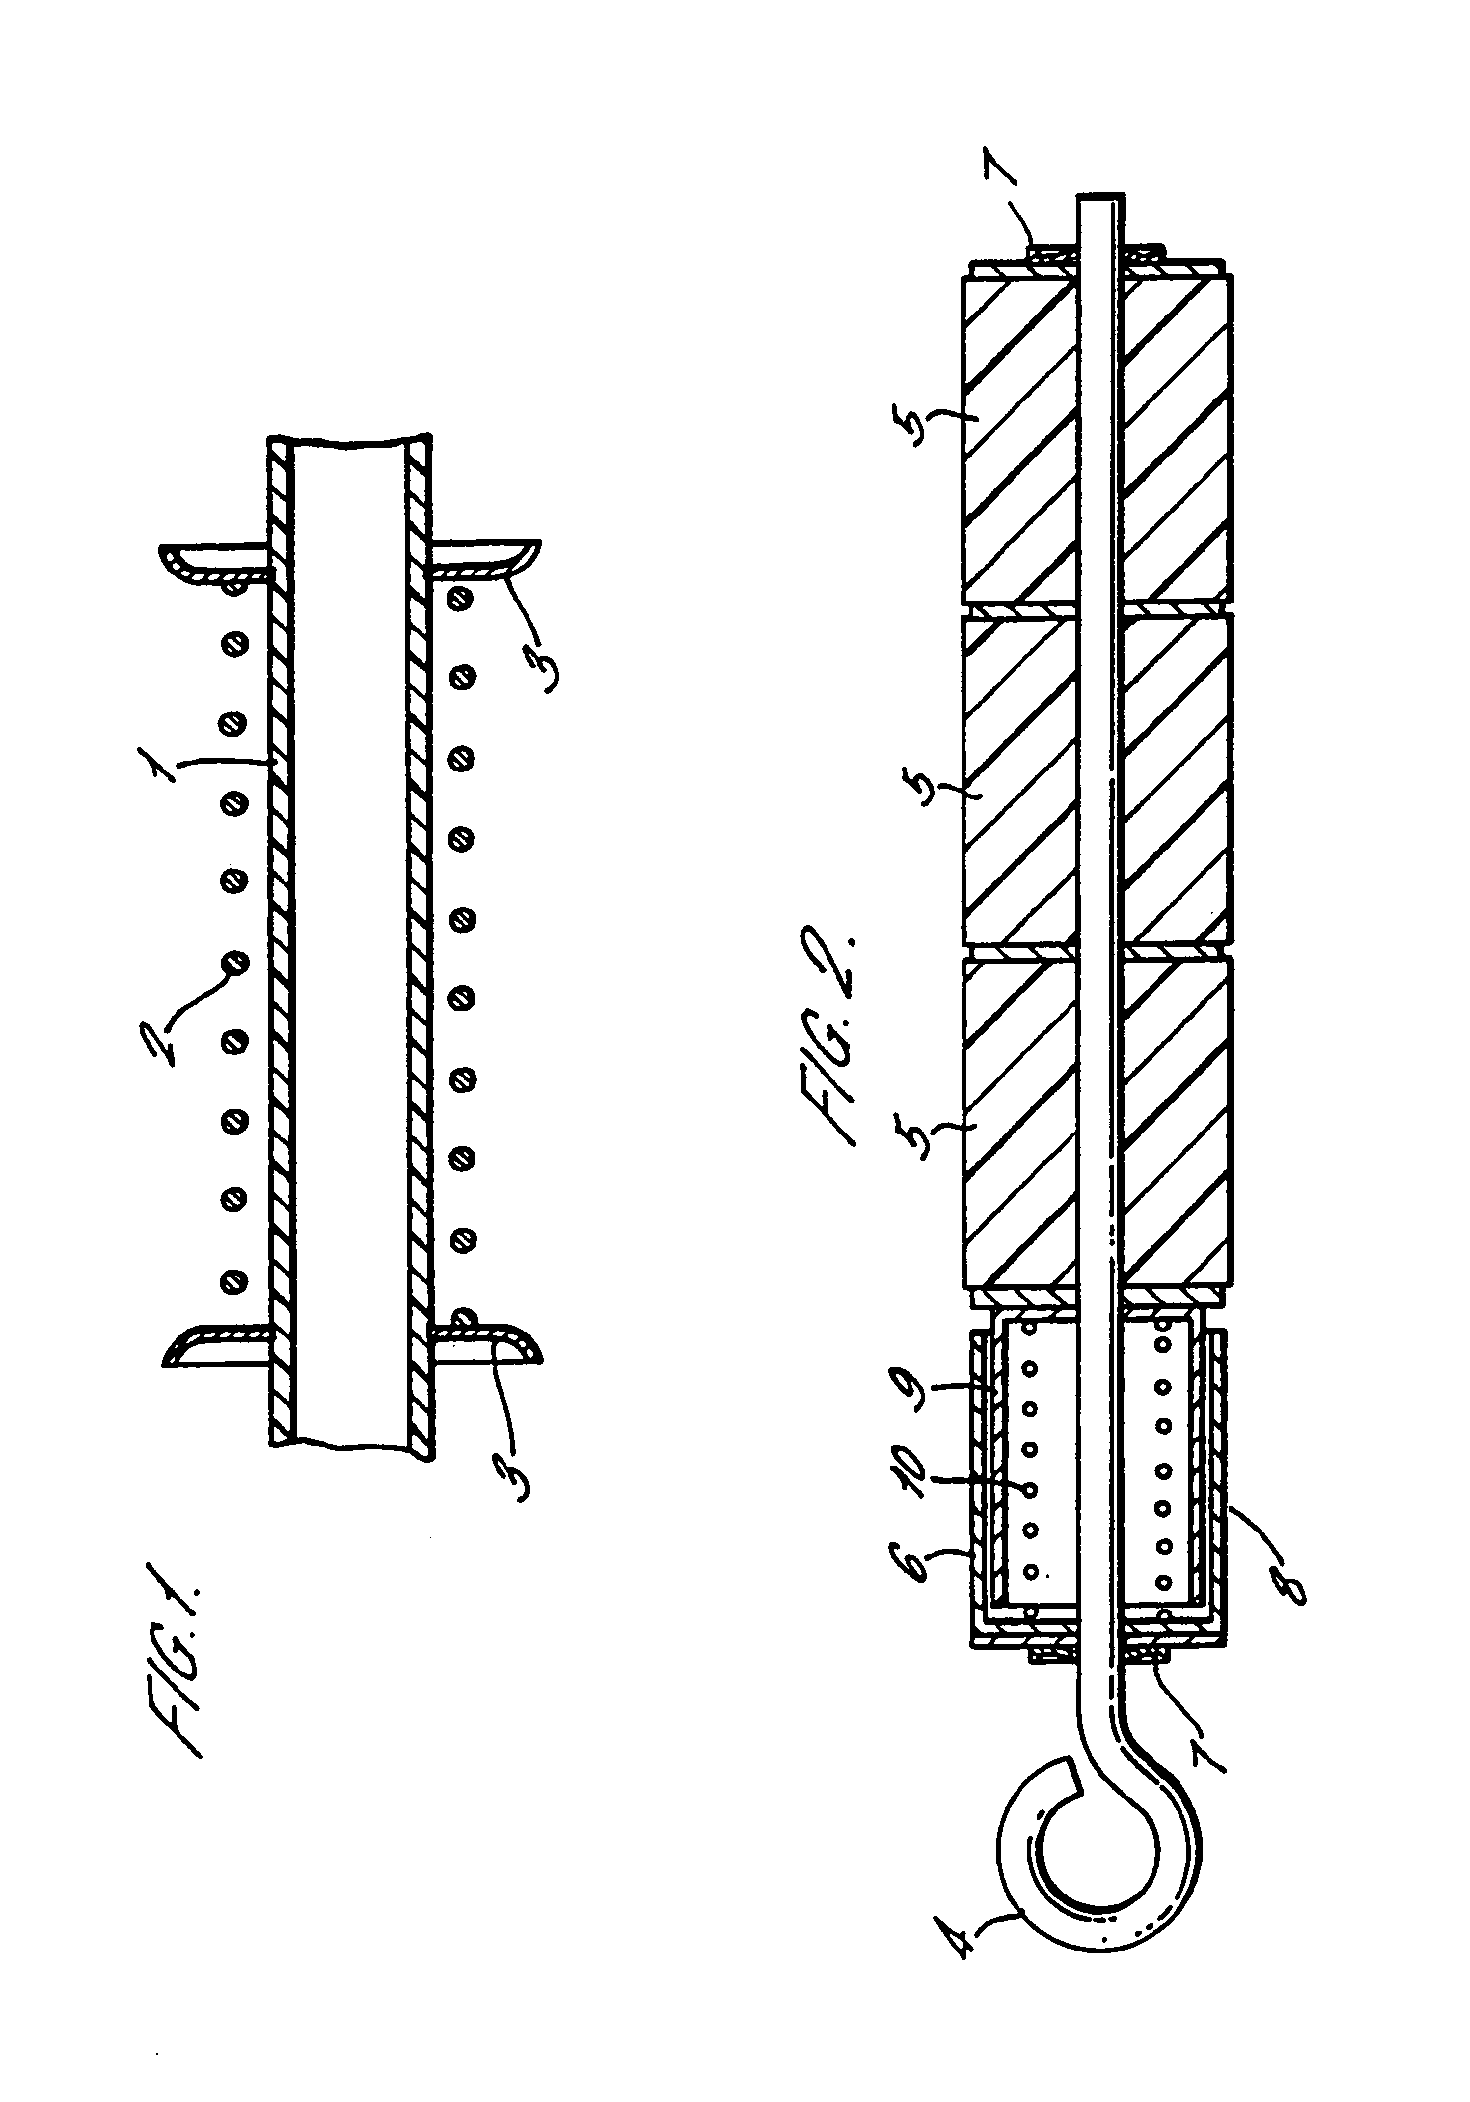 Device for detecting the presence of a chemical contaminant